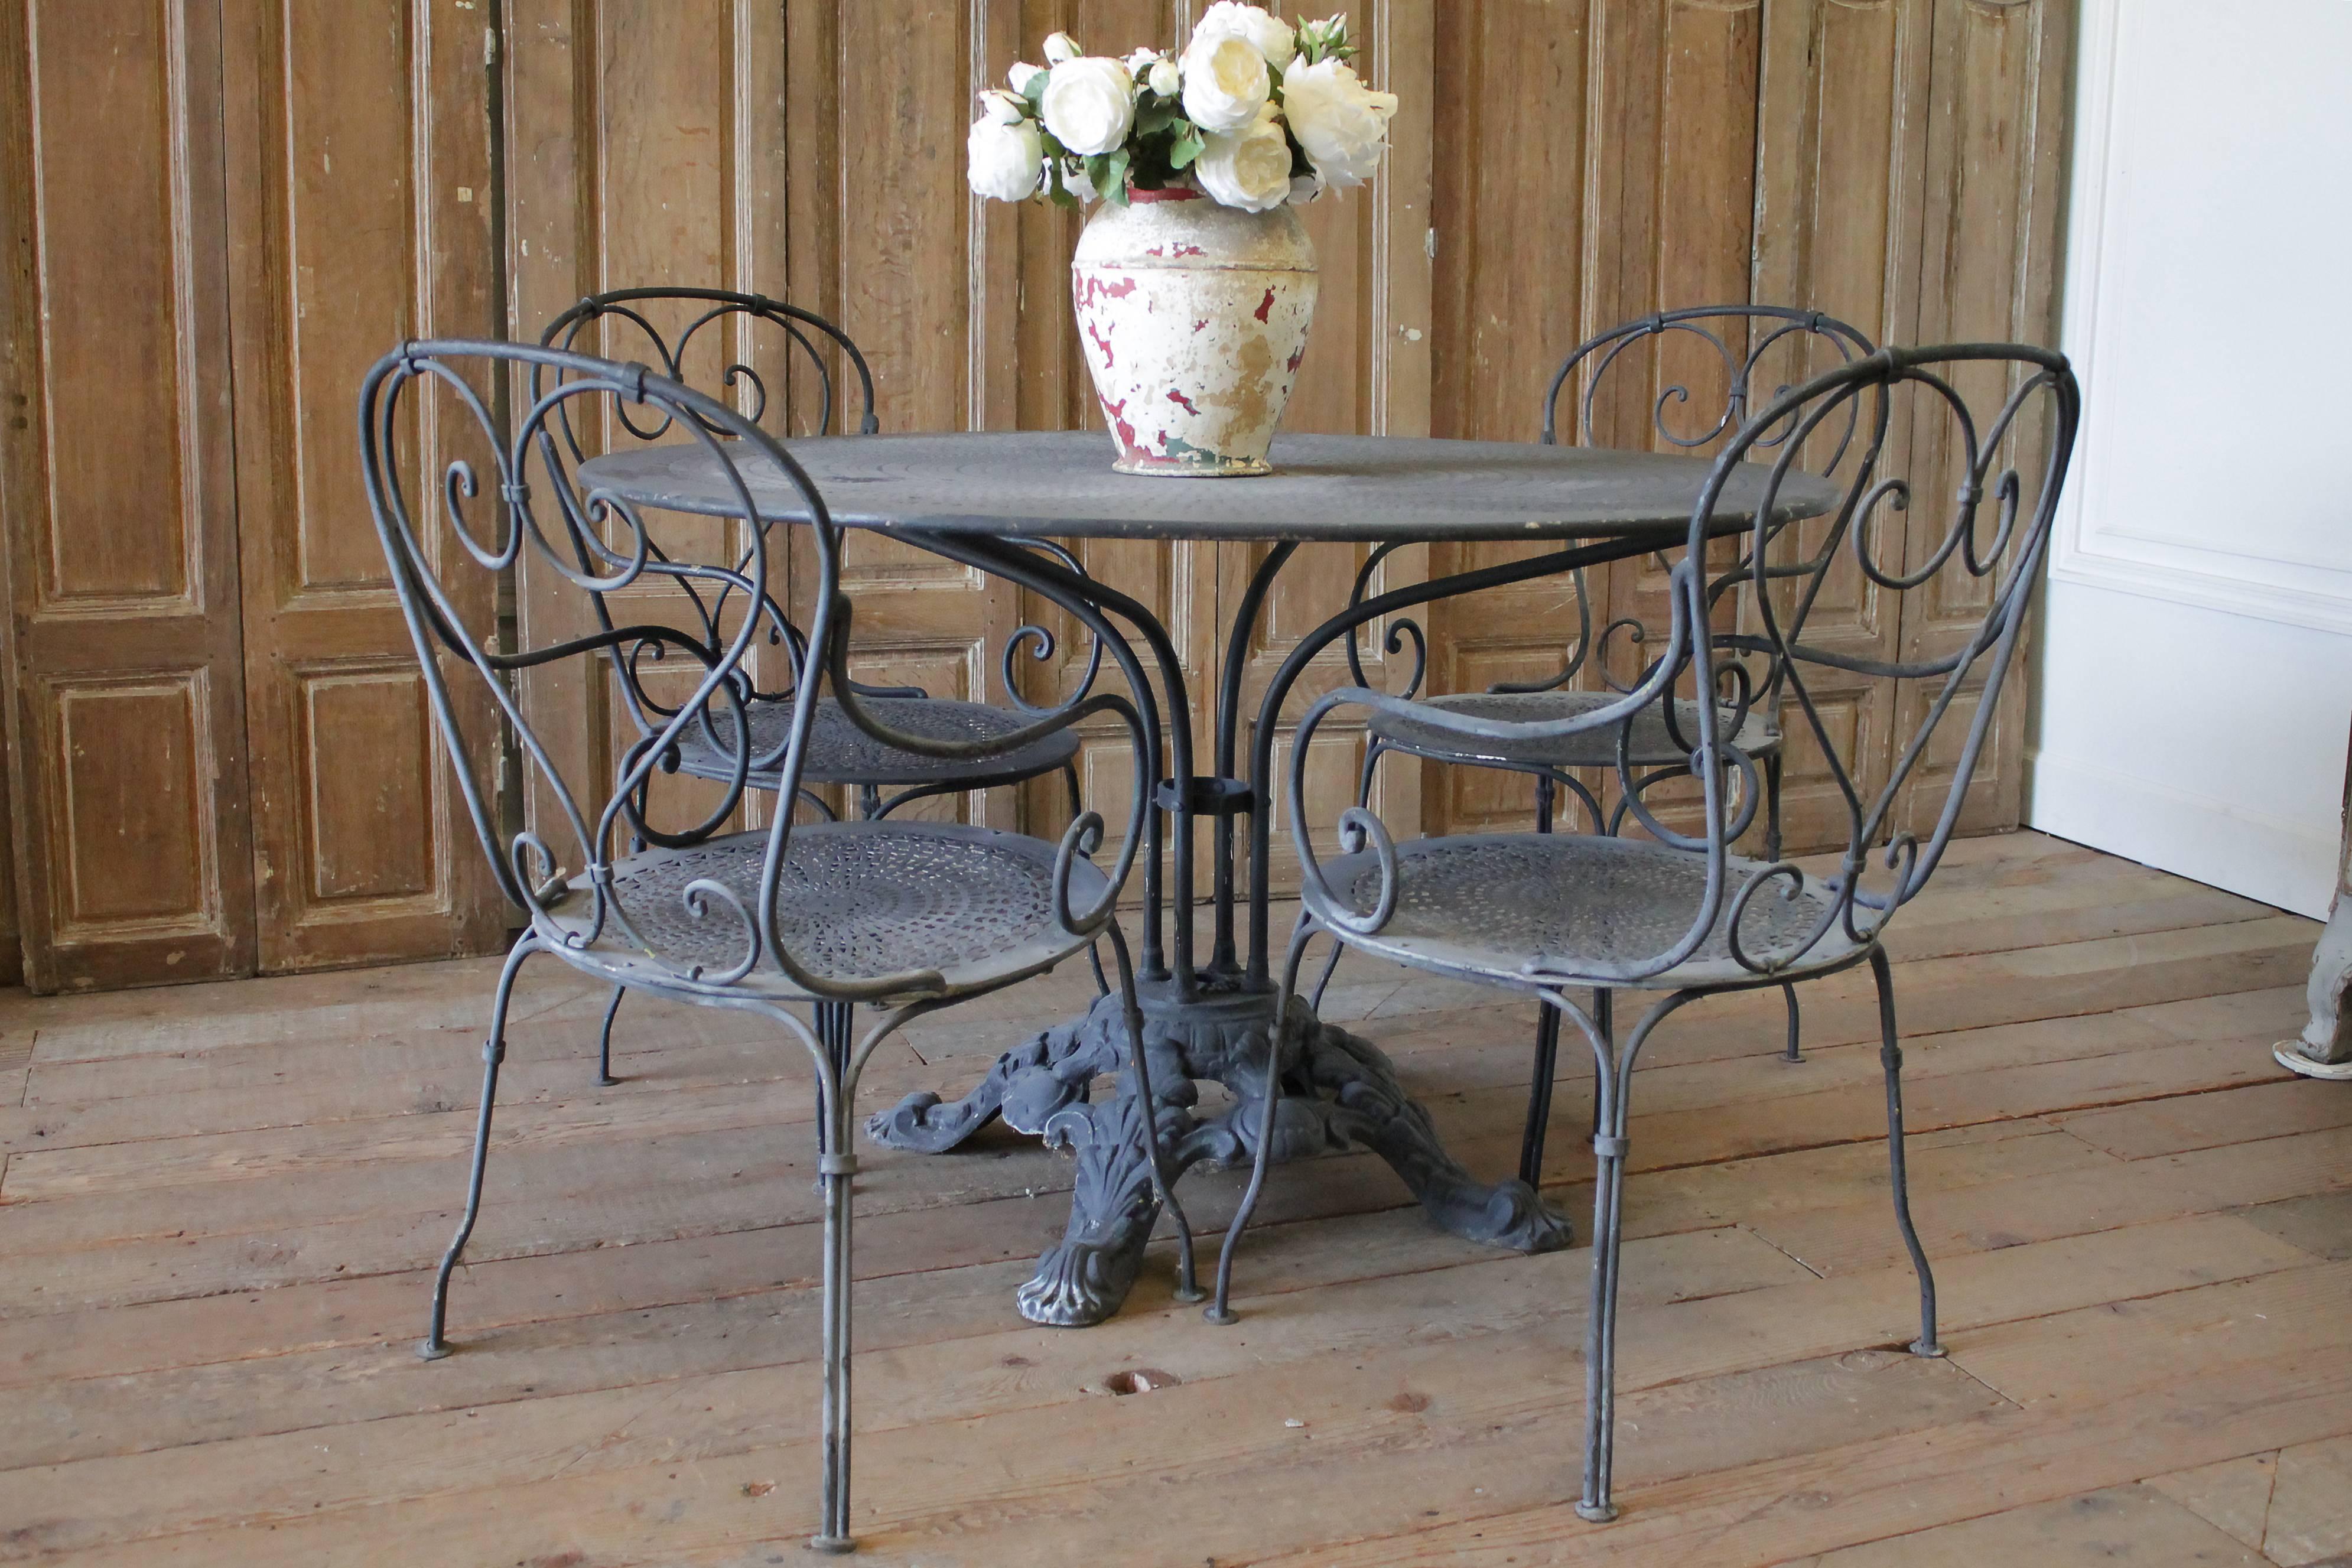 Black iron French Patio outdoor table and chairs
Original finish, faded black iron. Table has cut out design on the top, as well as the seats on the chairs. This round metal garden table was created in the 1880s and many of them used on the terrace